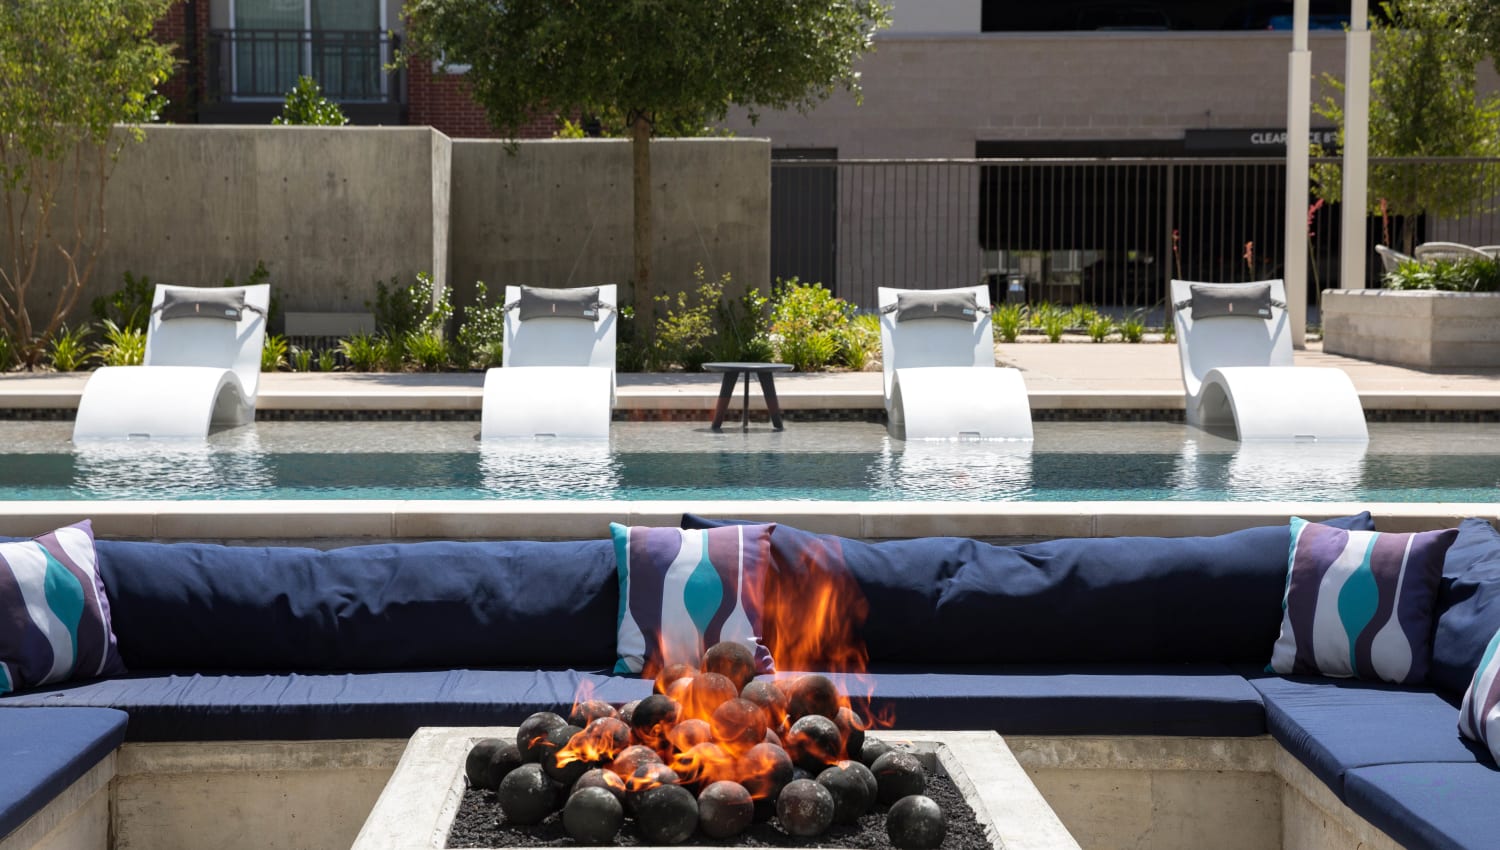 Lounge seating around the fire pit near the pool at Lux on Main in Carrollton, Texas